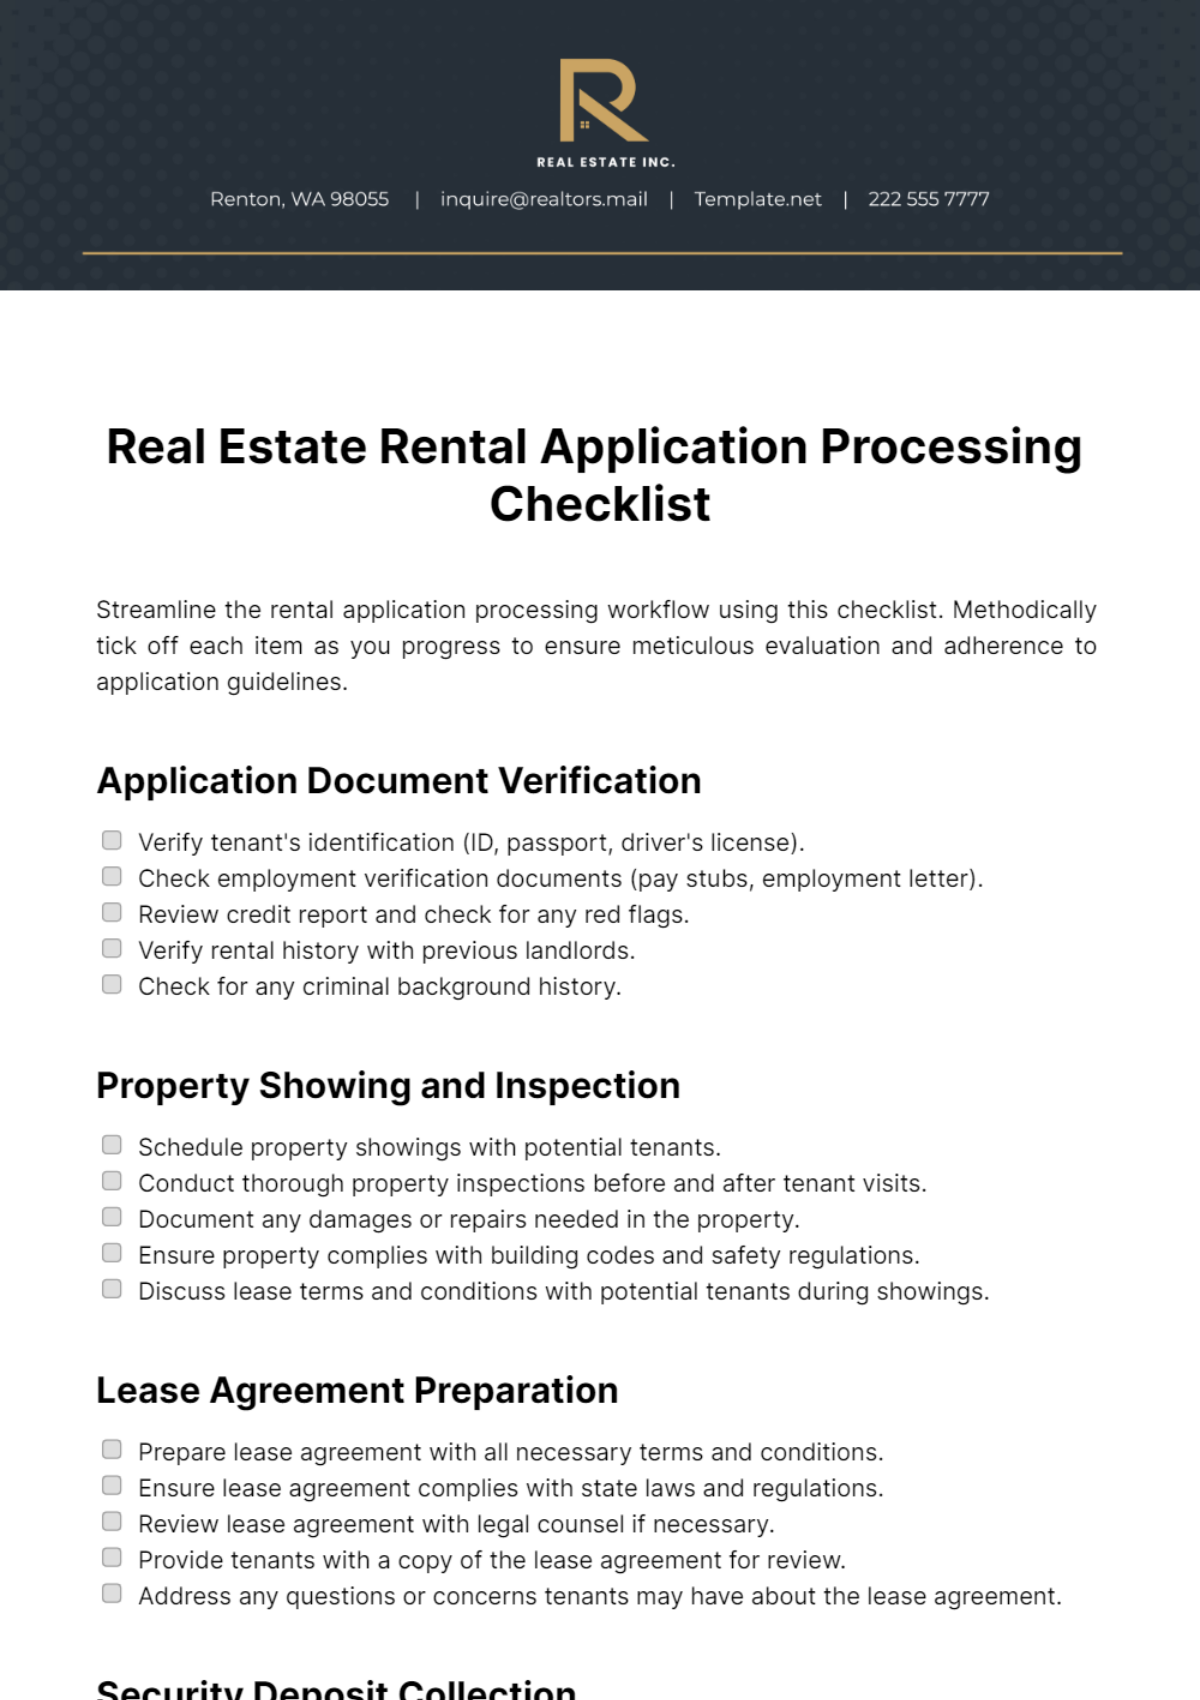 Free Real Estate Rental Application Processing Checklist Template